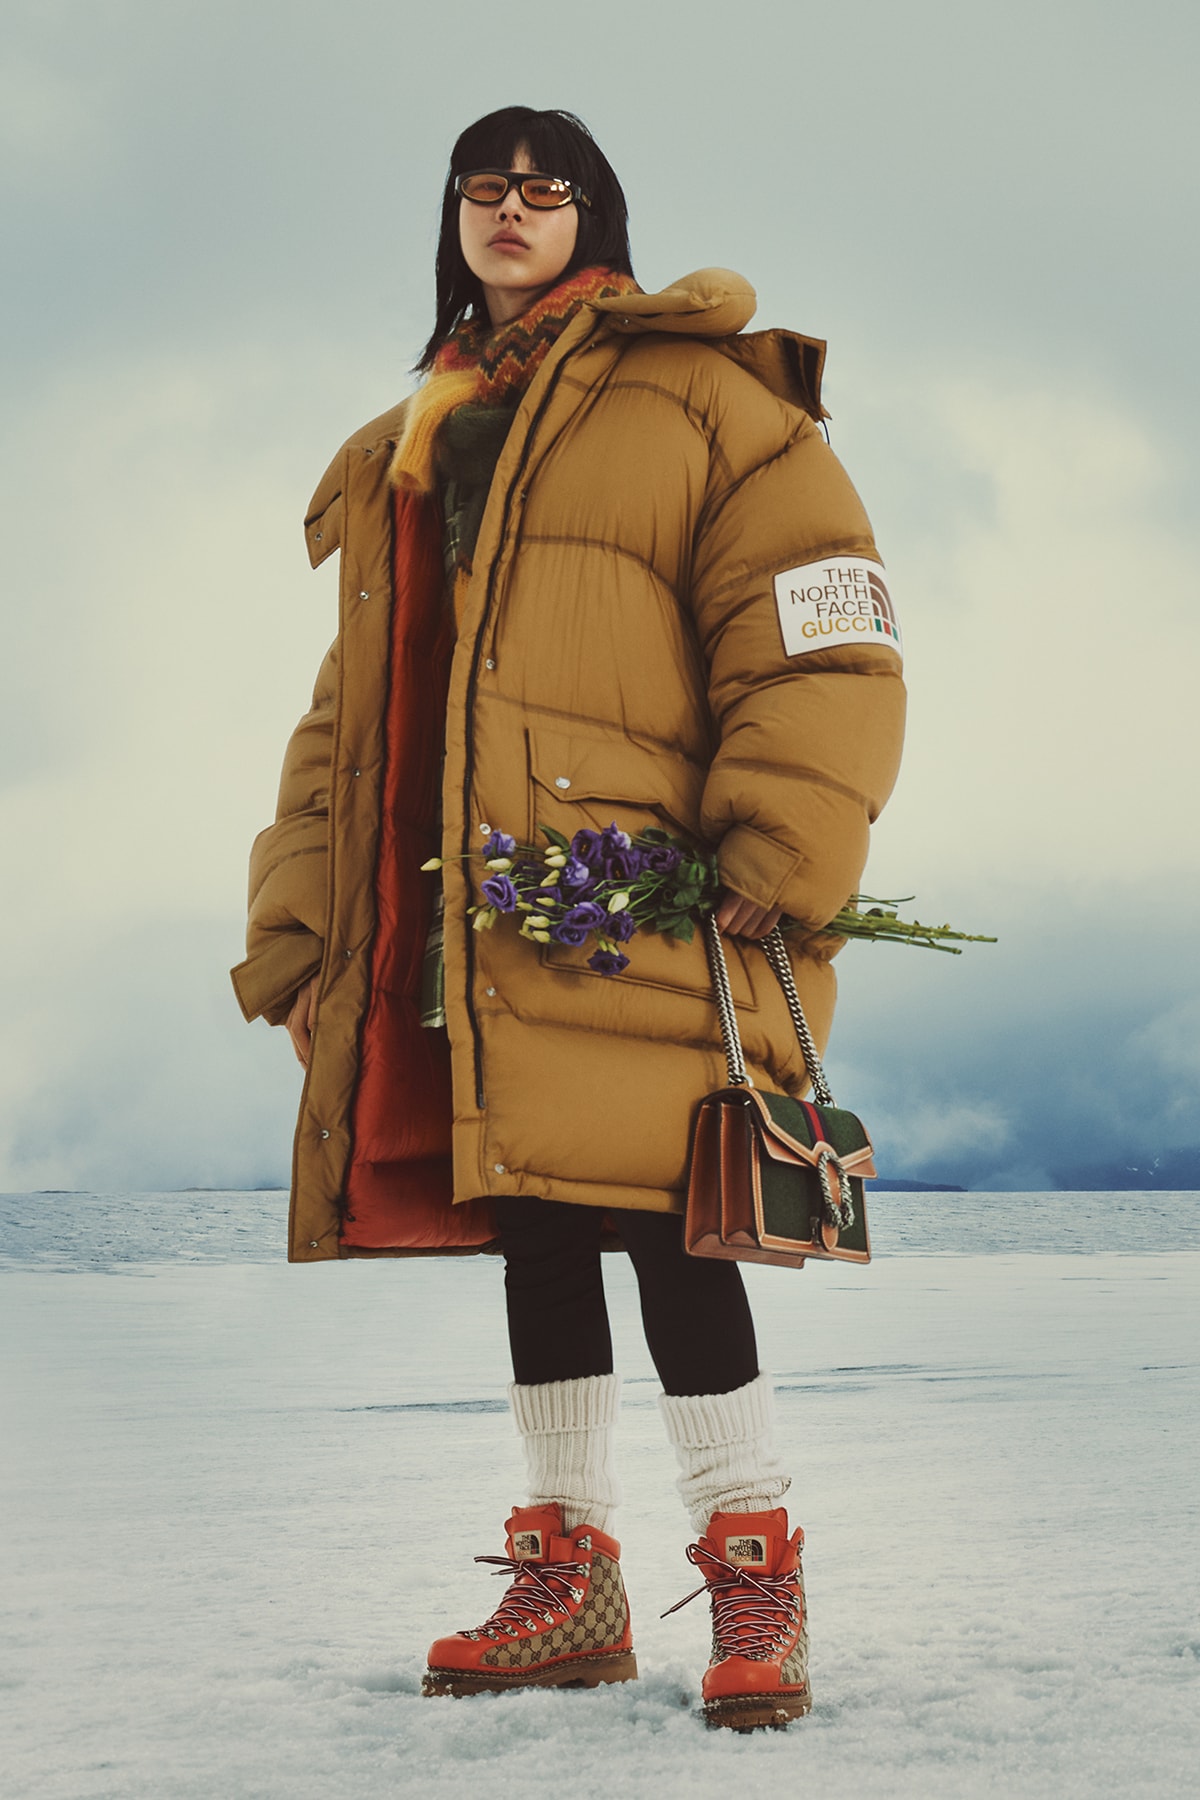 The North Face x Gucci Apparel: Apparel, Bags & More